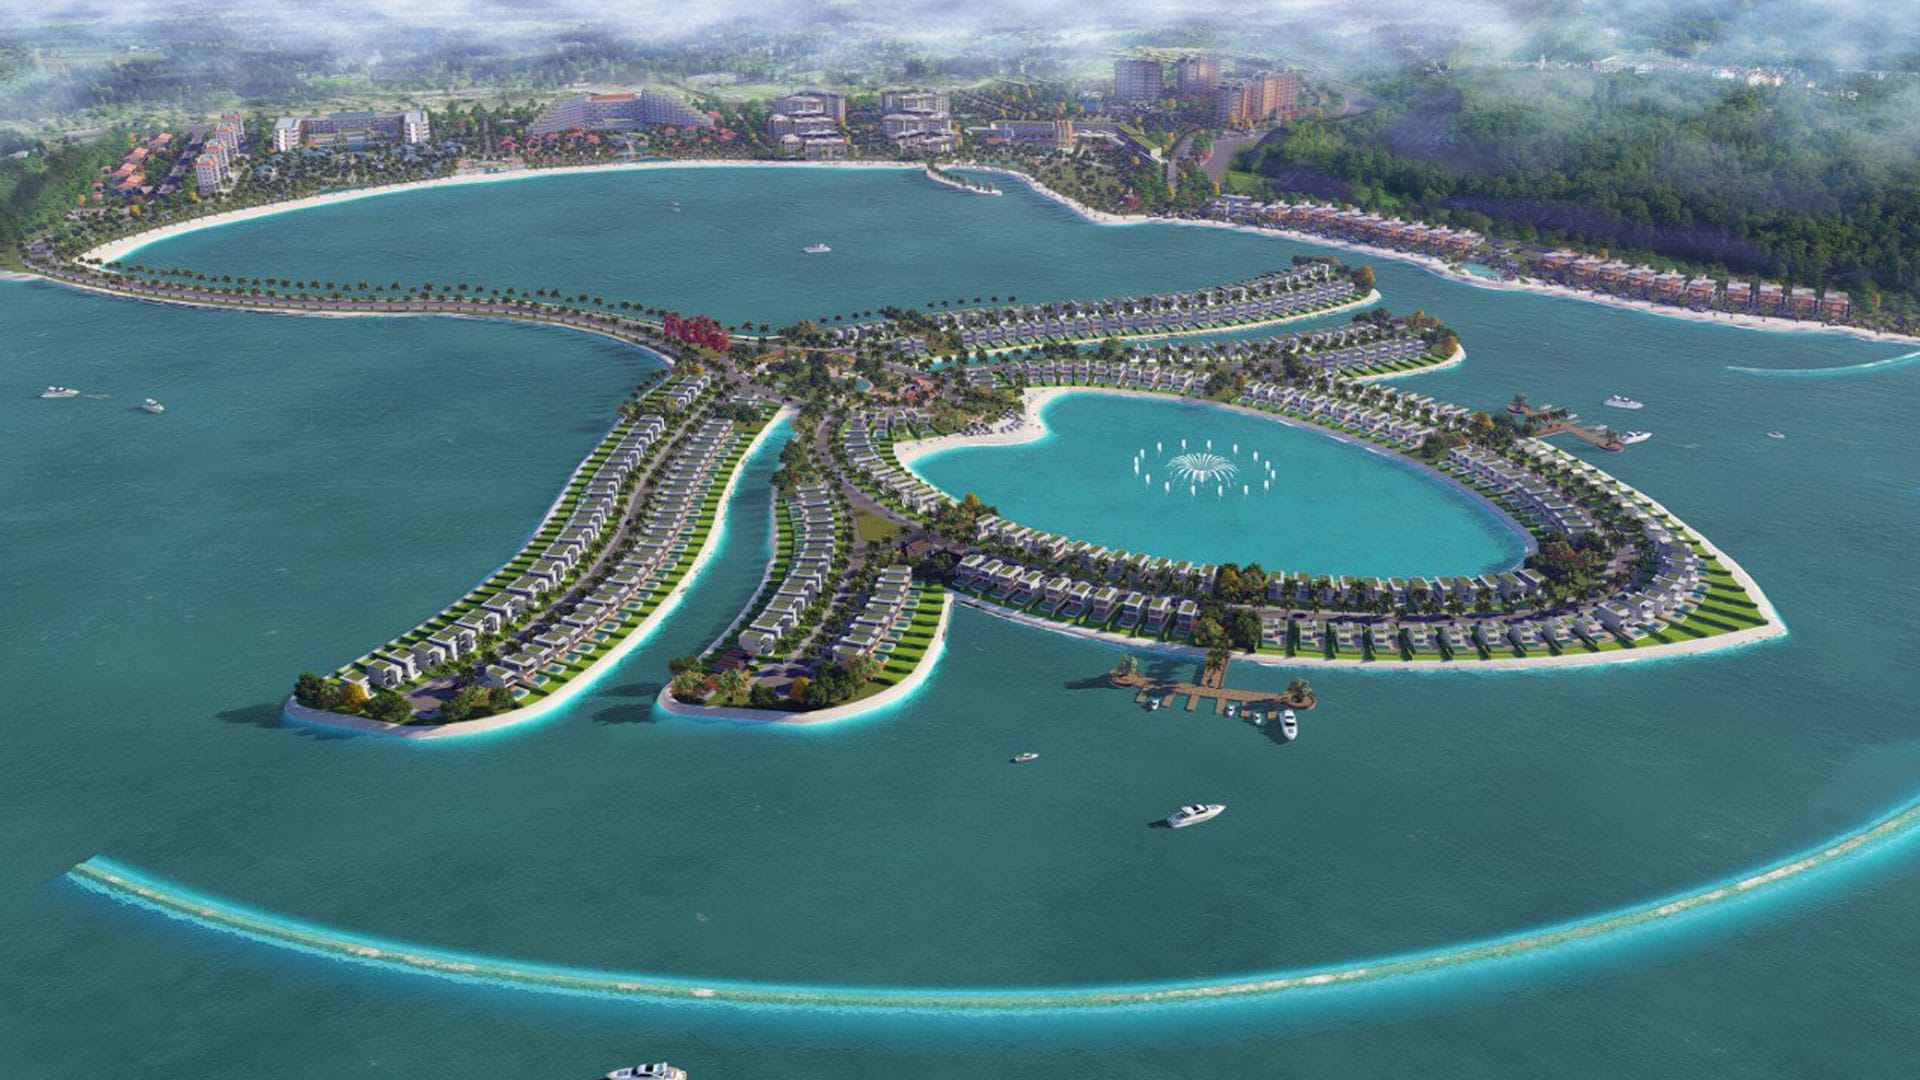 Lotus island combining aesthetics and practicality at a coastal site